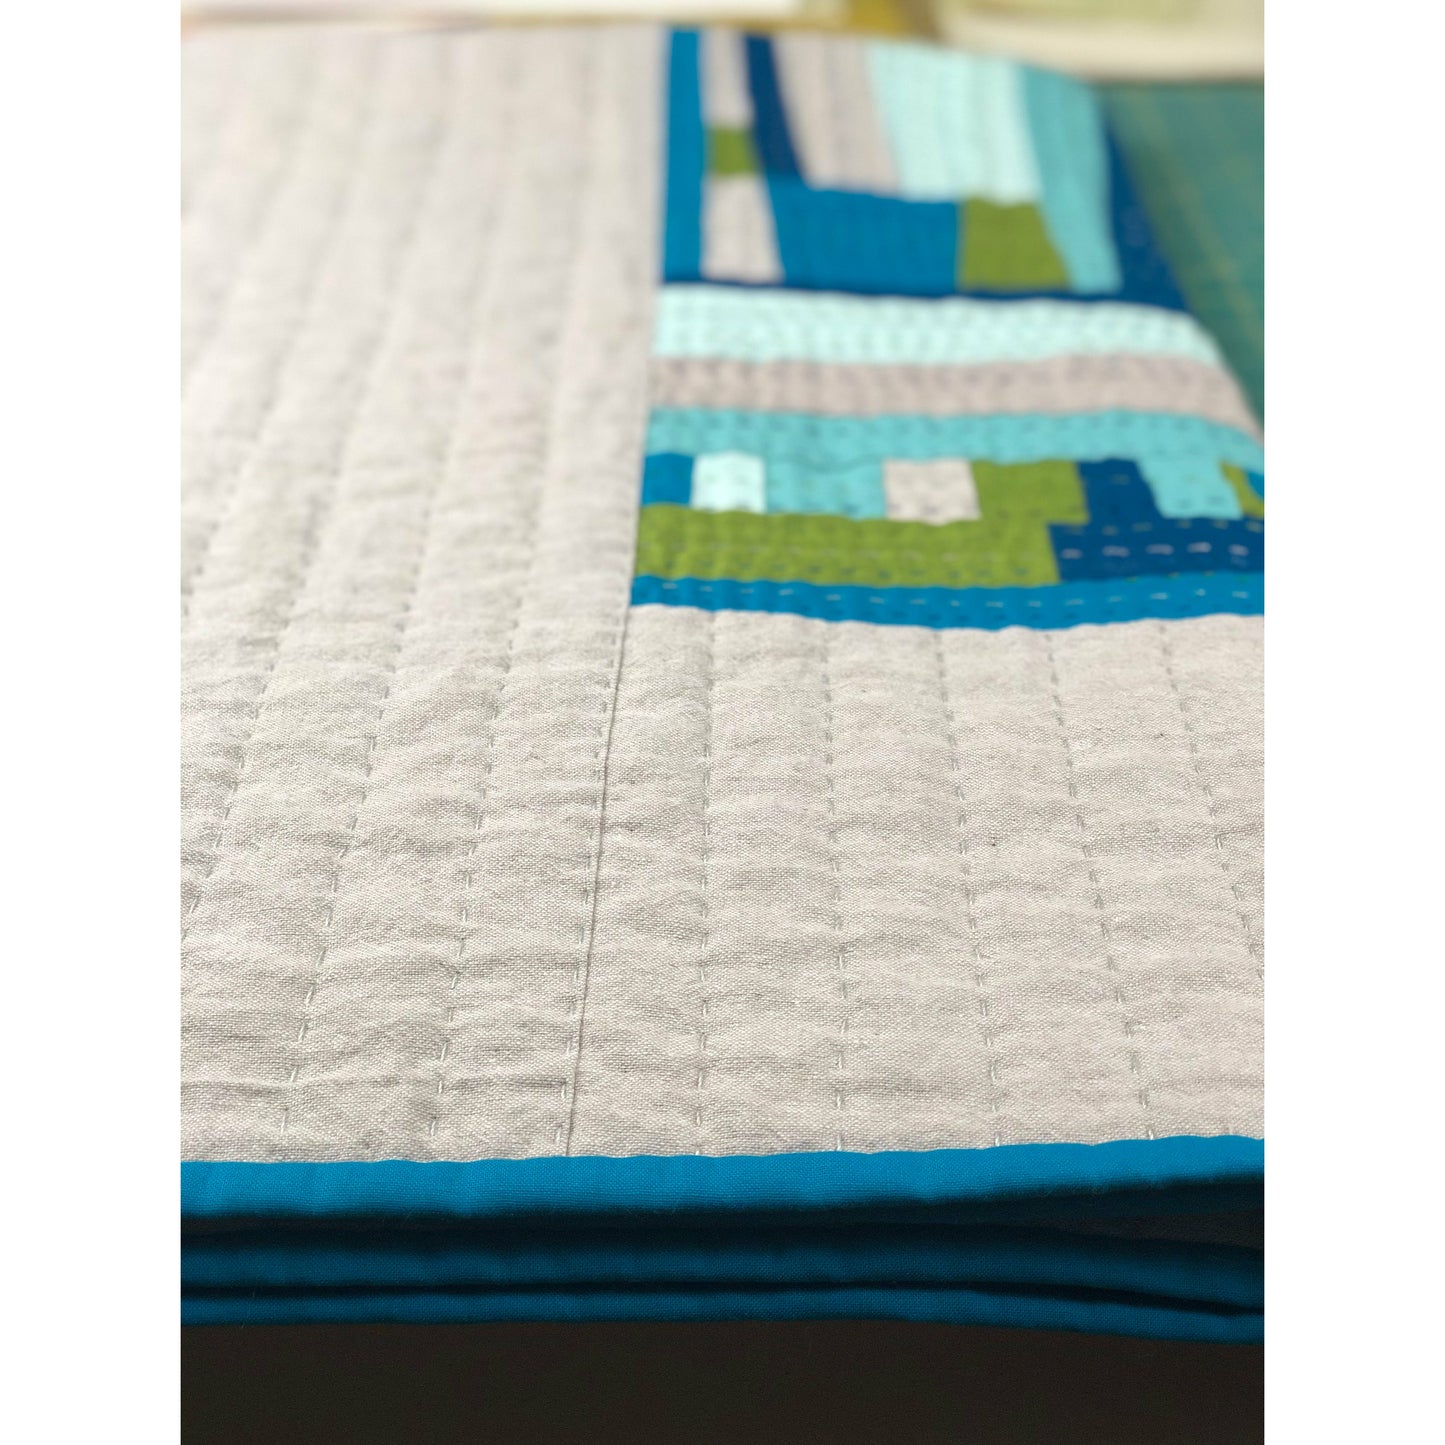 Handmade Quilt- Cotton and Linen, Hand Quilted